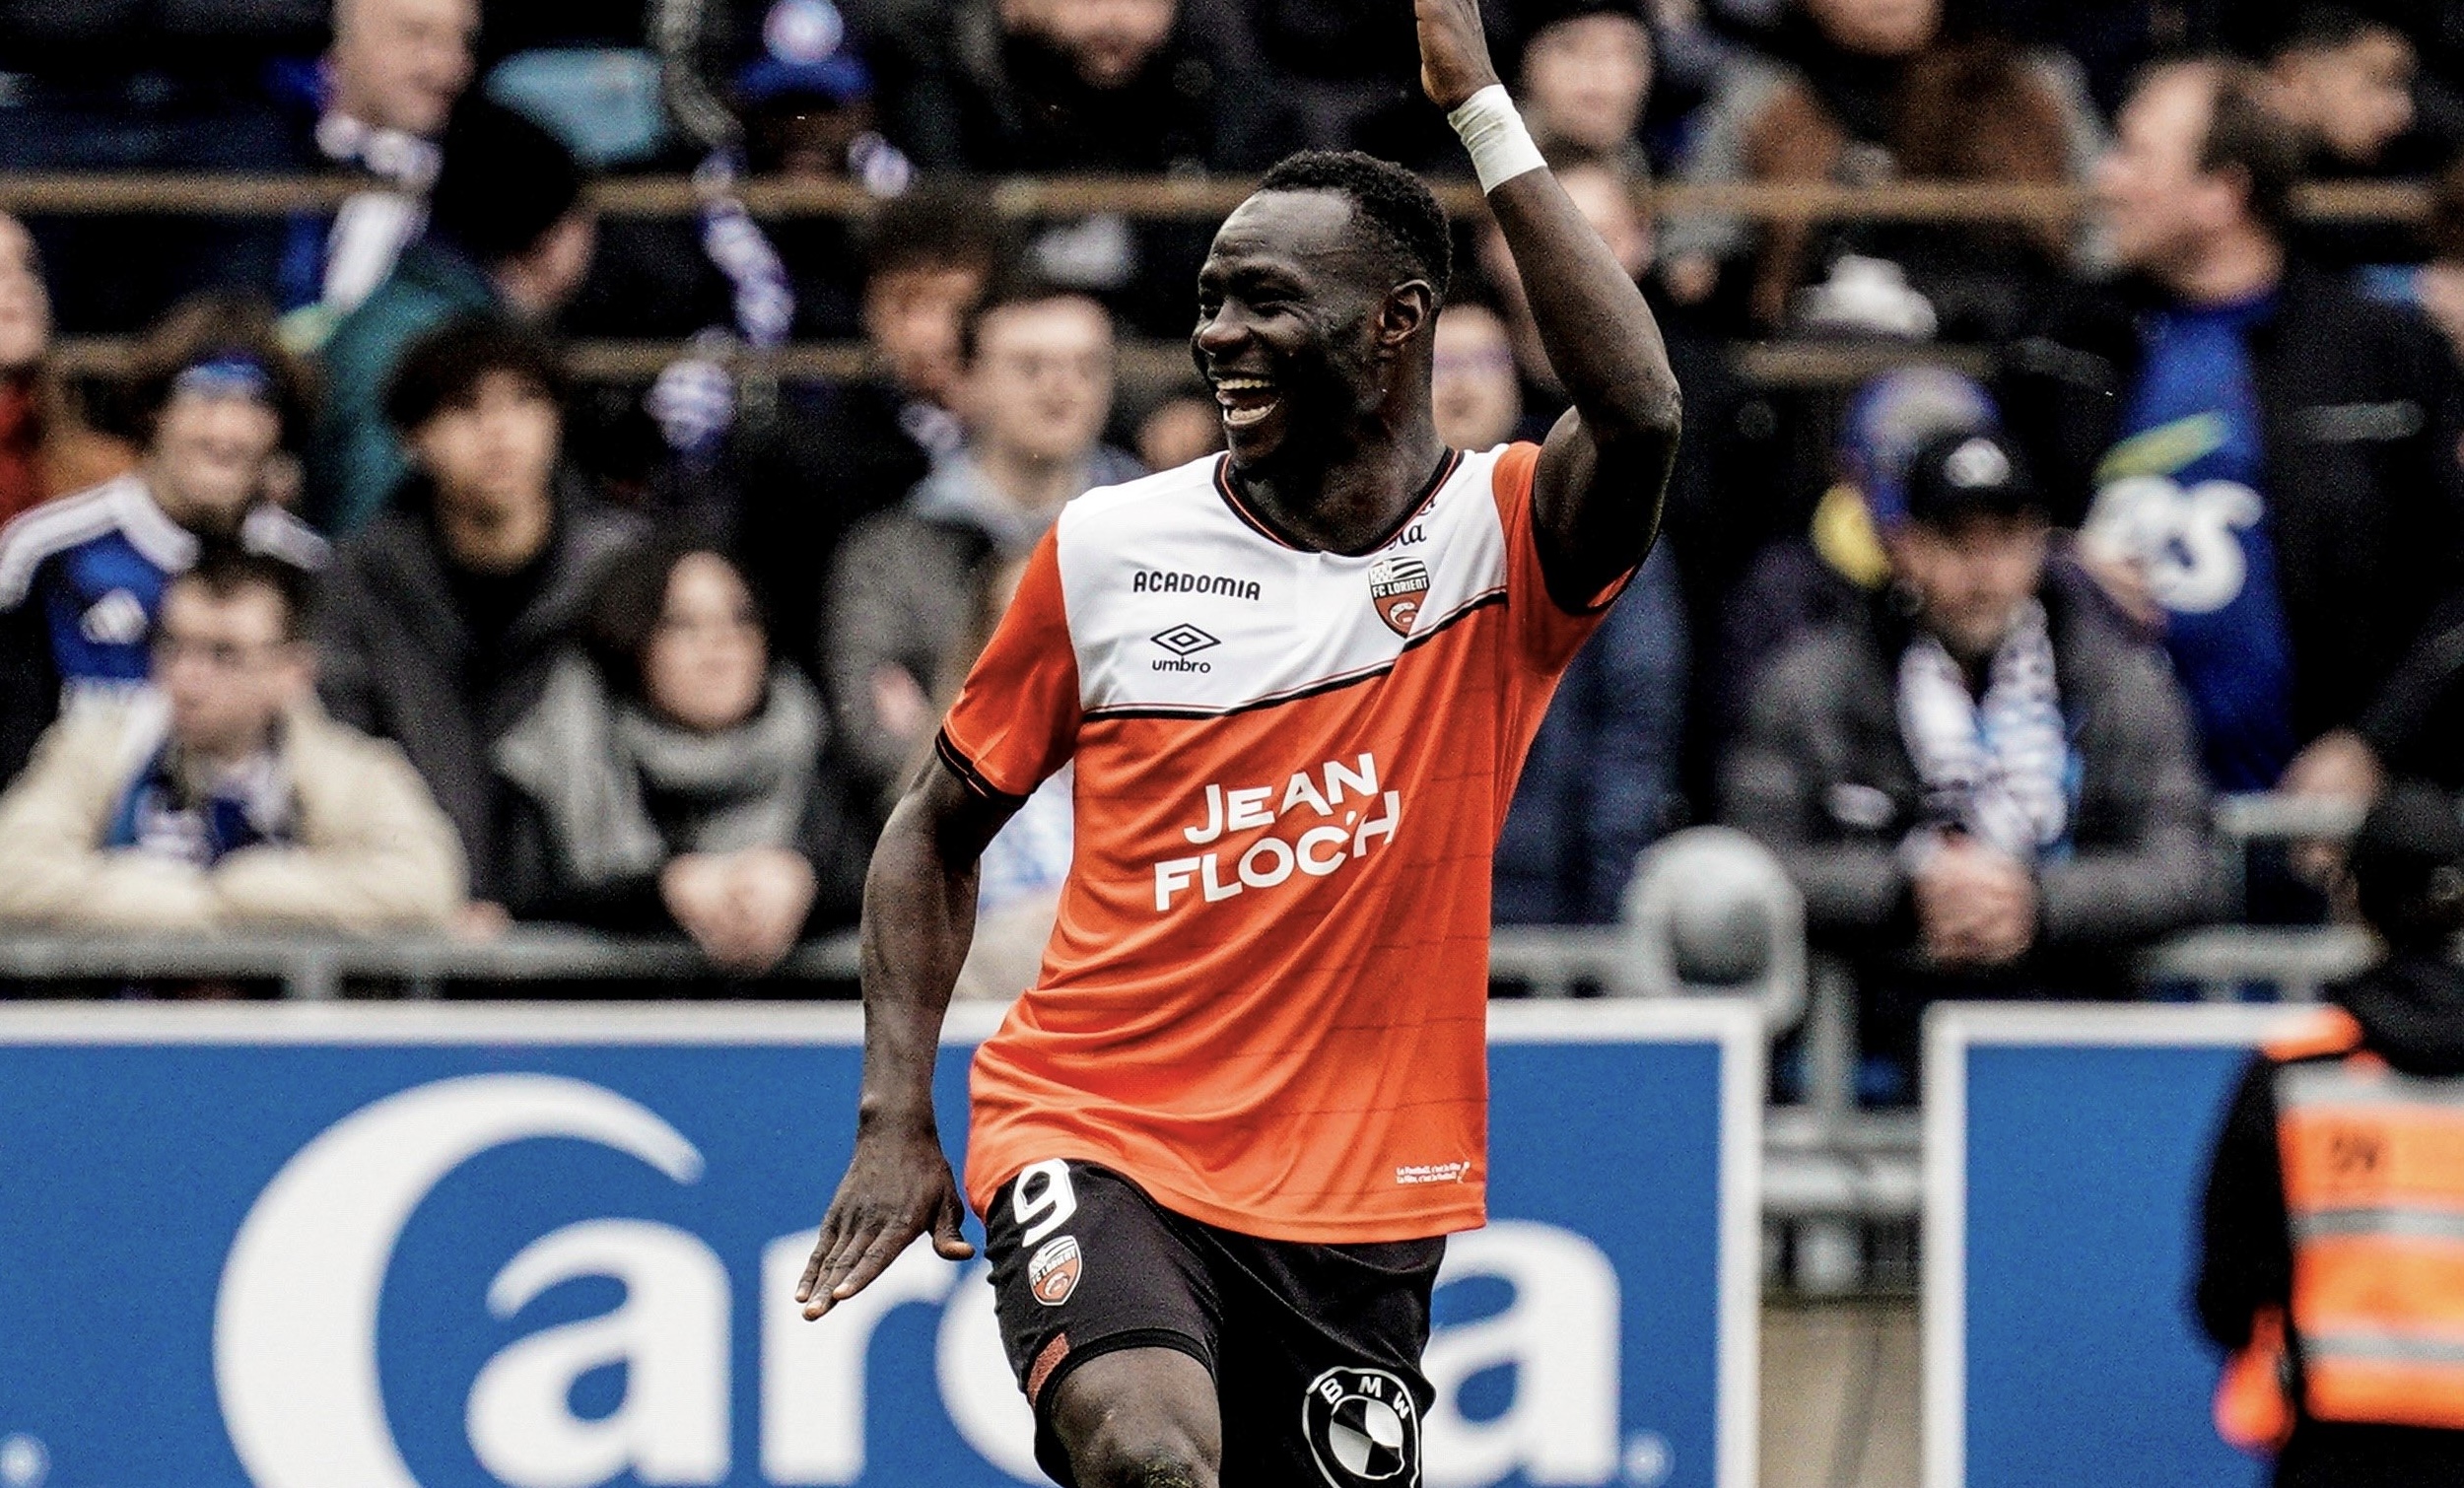 Mohamed Bamba celebrates scoring a goal for FC Lorient